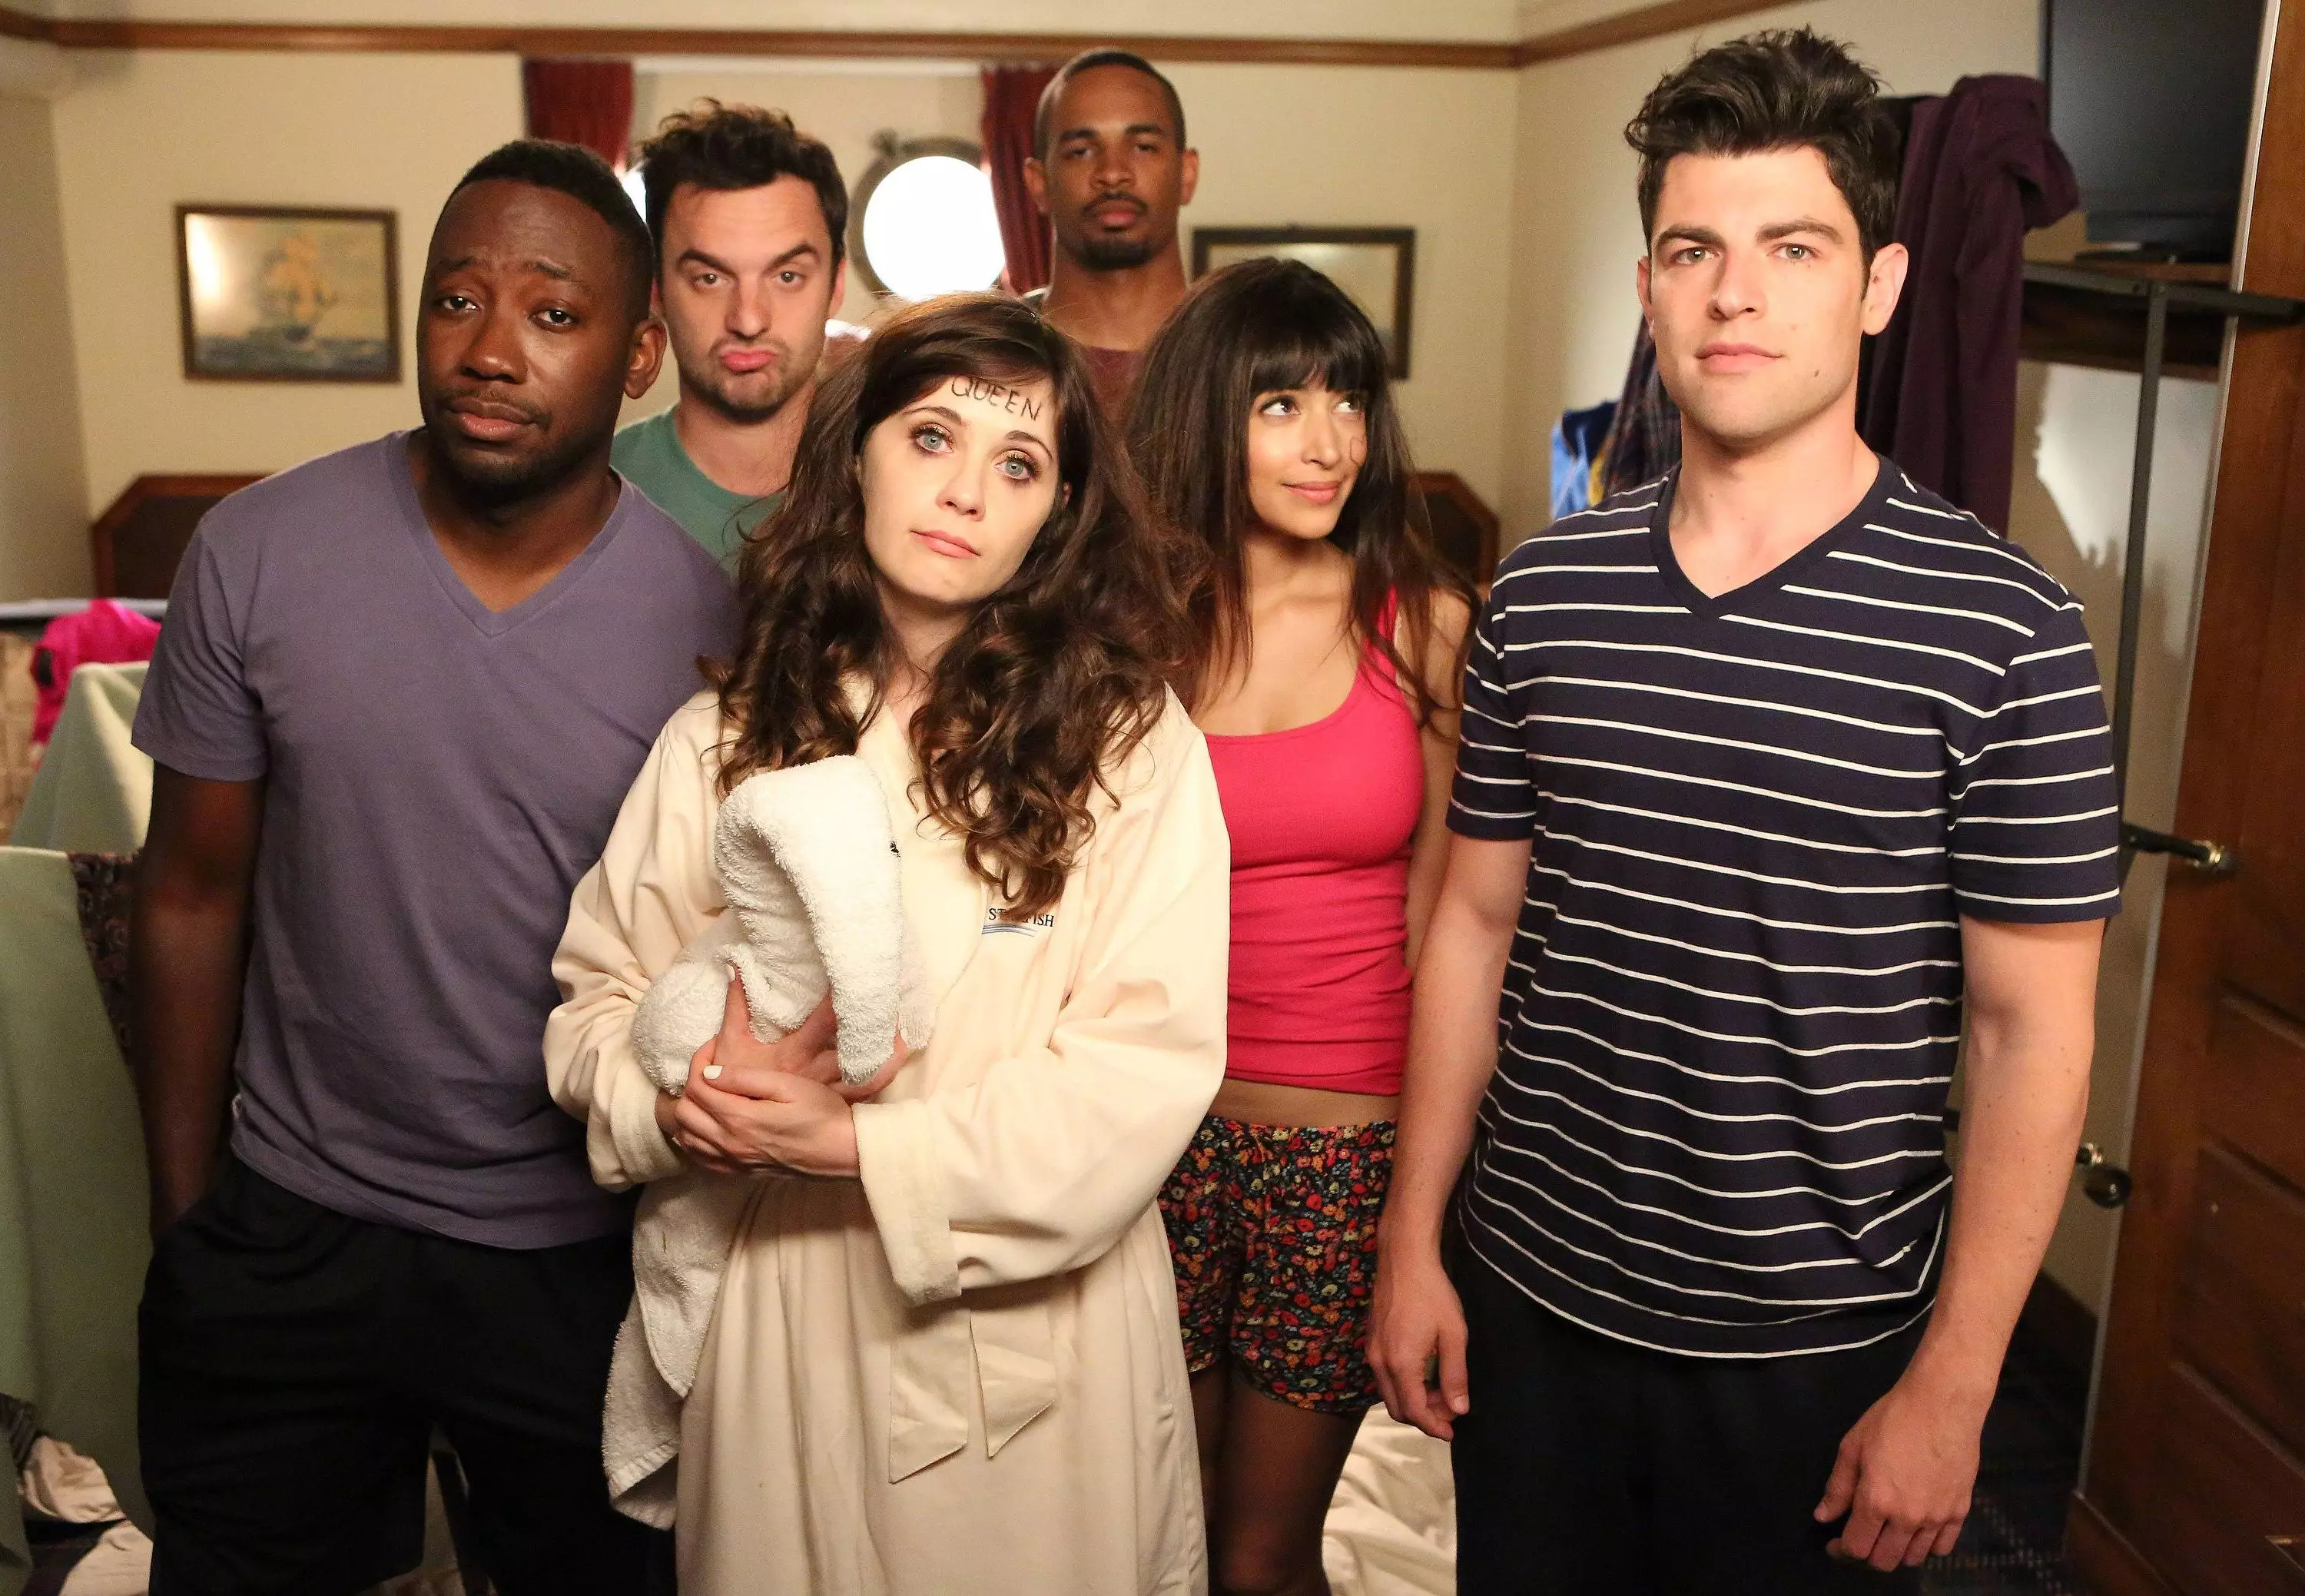 You can now watch New Girl on Netflix (